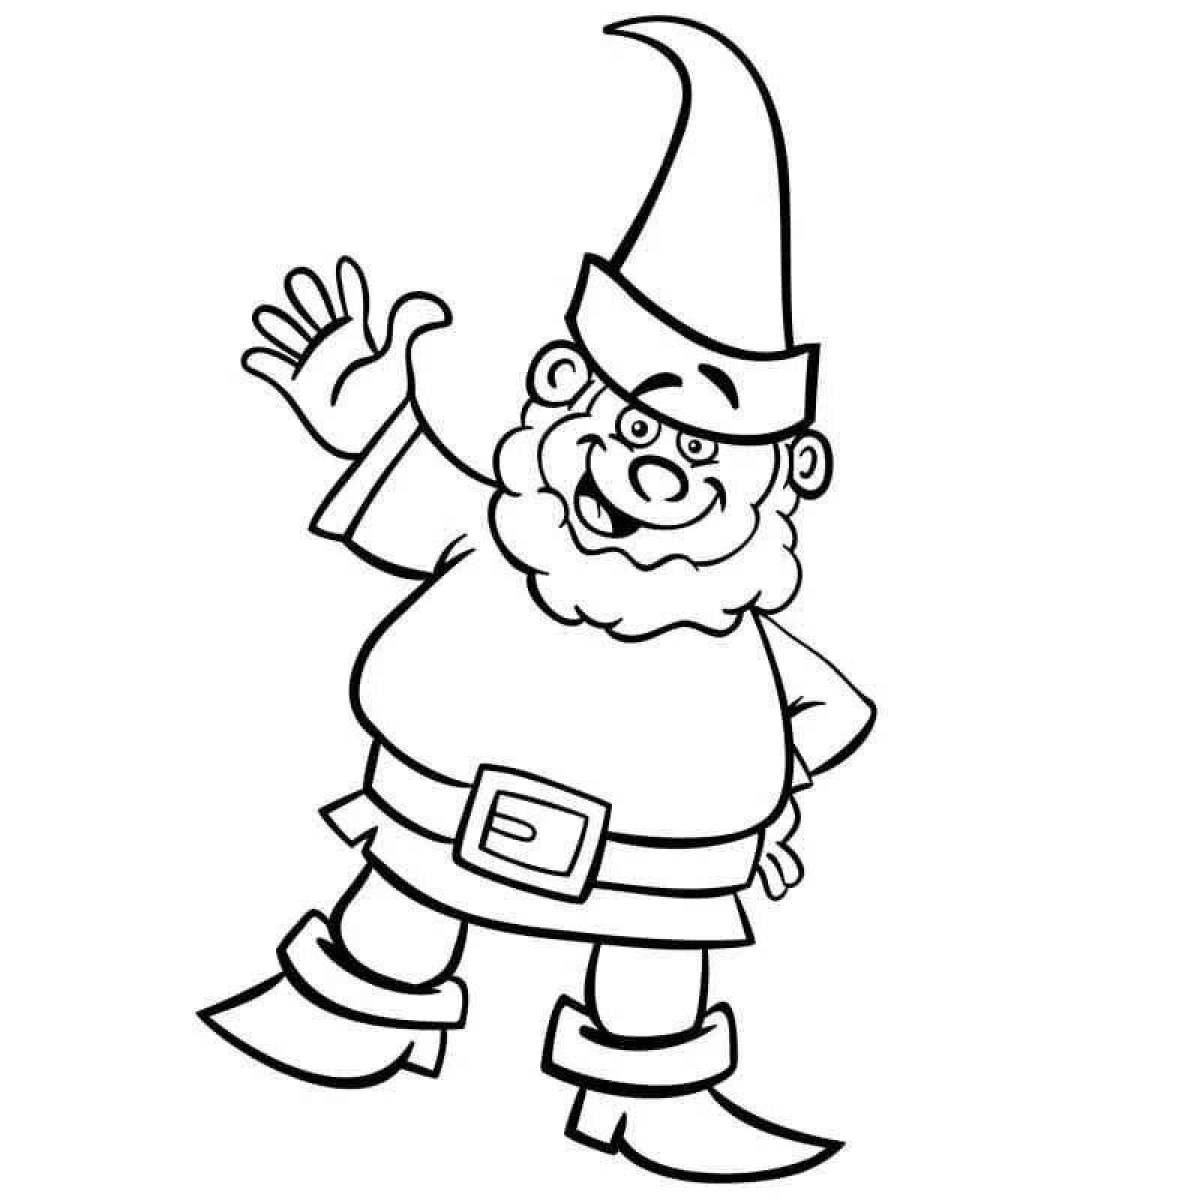 Gorgeous gnome coloring book